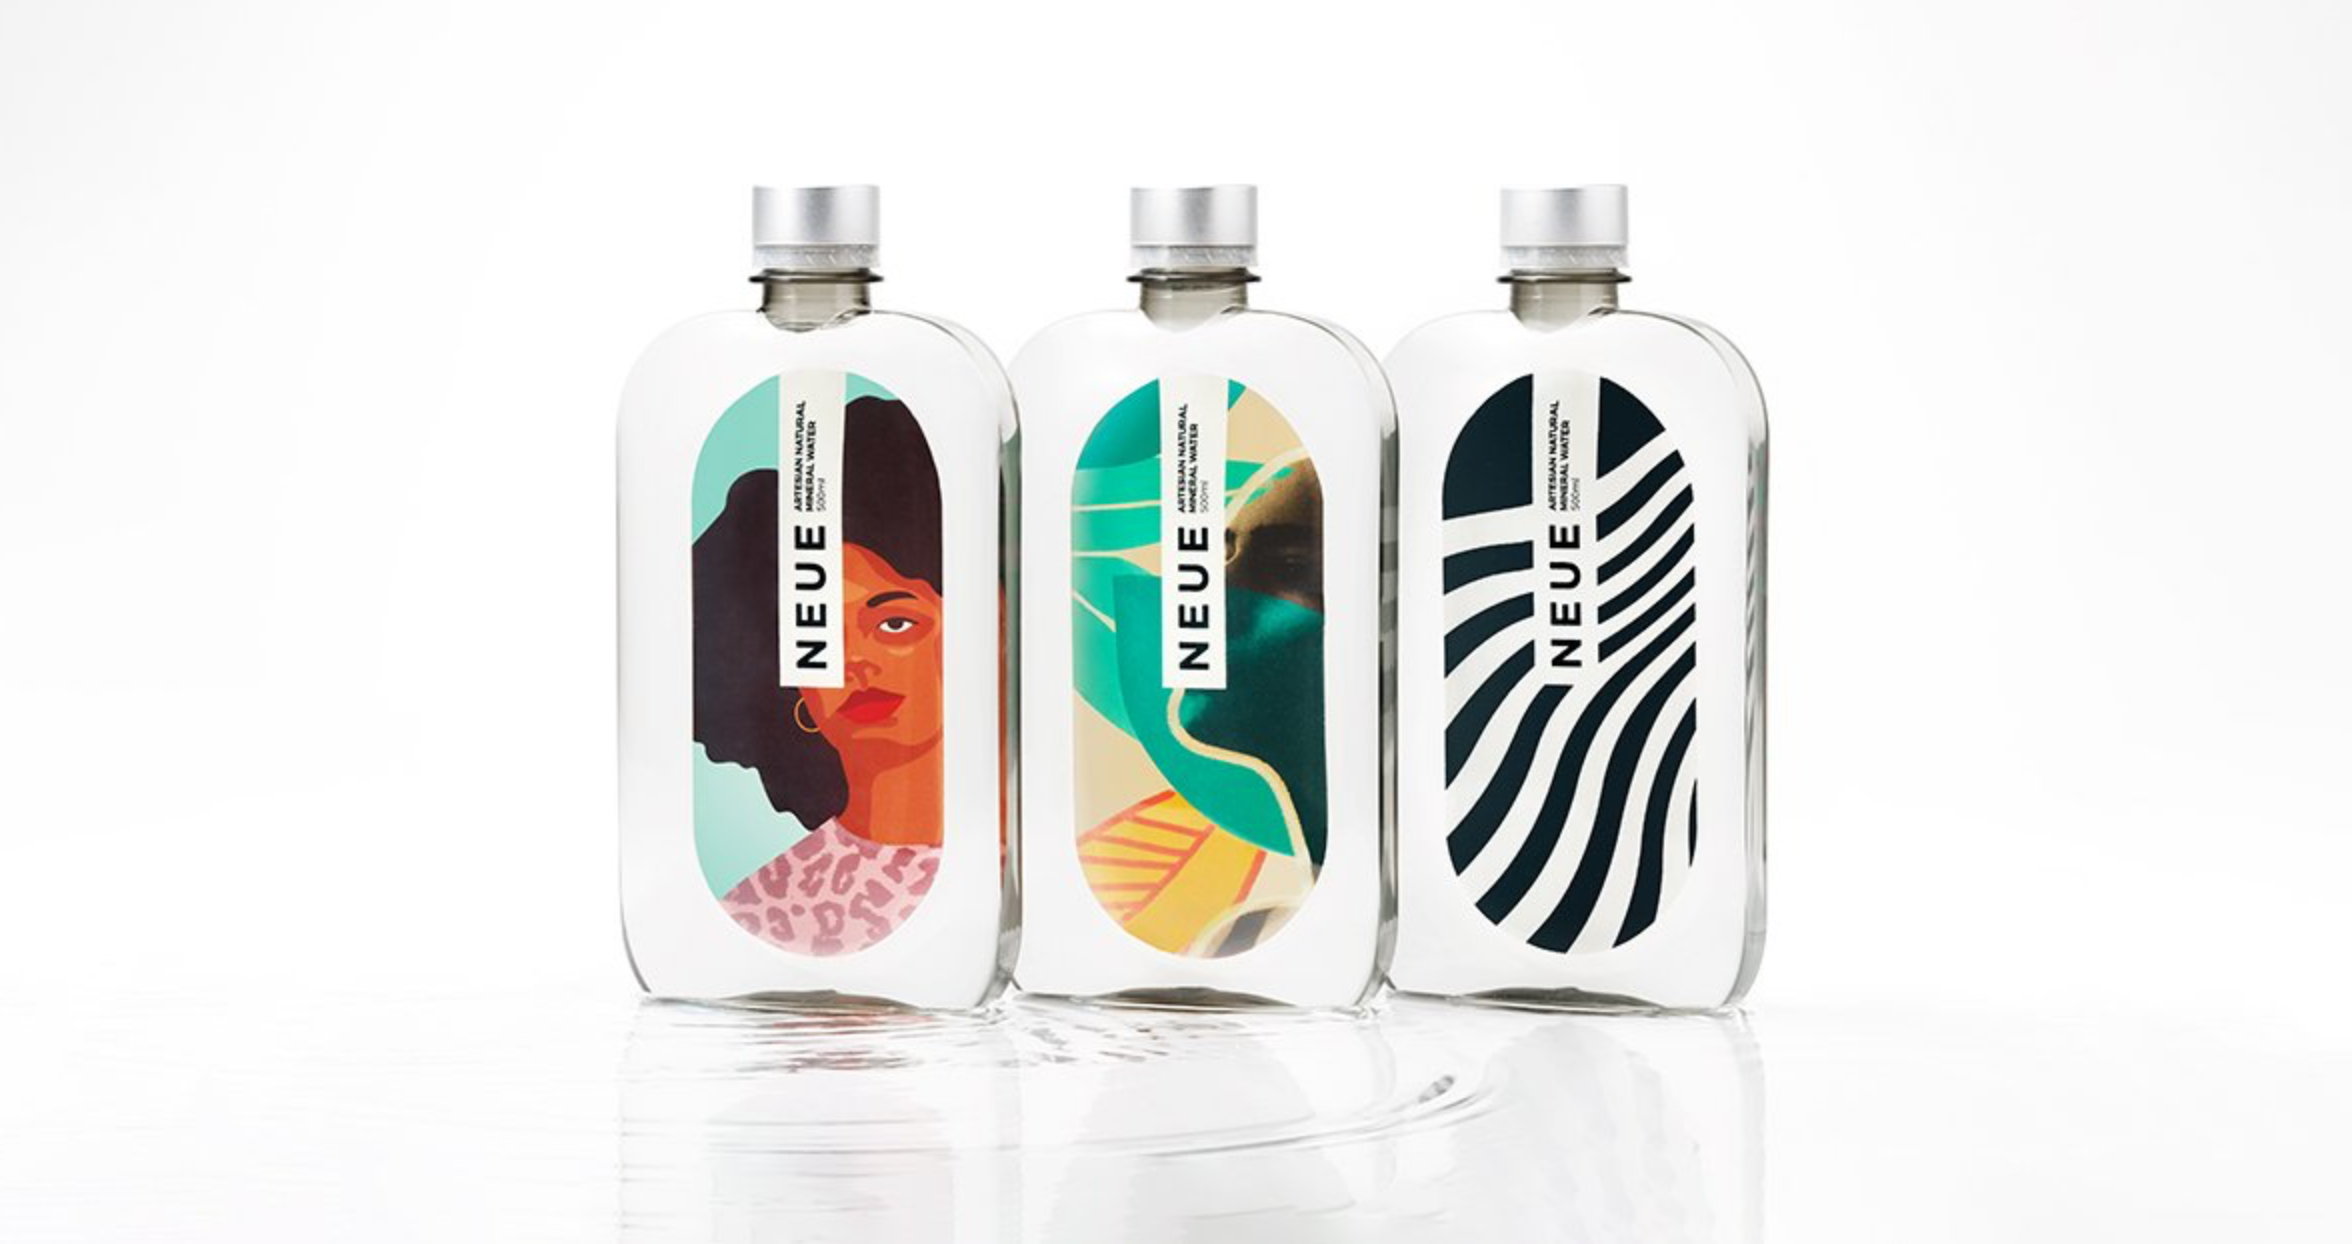 Berry Creates Unique rPET Bottle for New Sustainable Luxury Brand